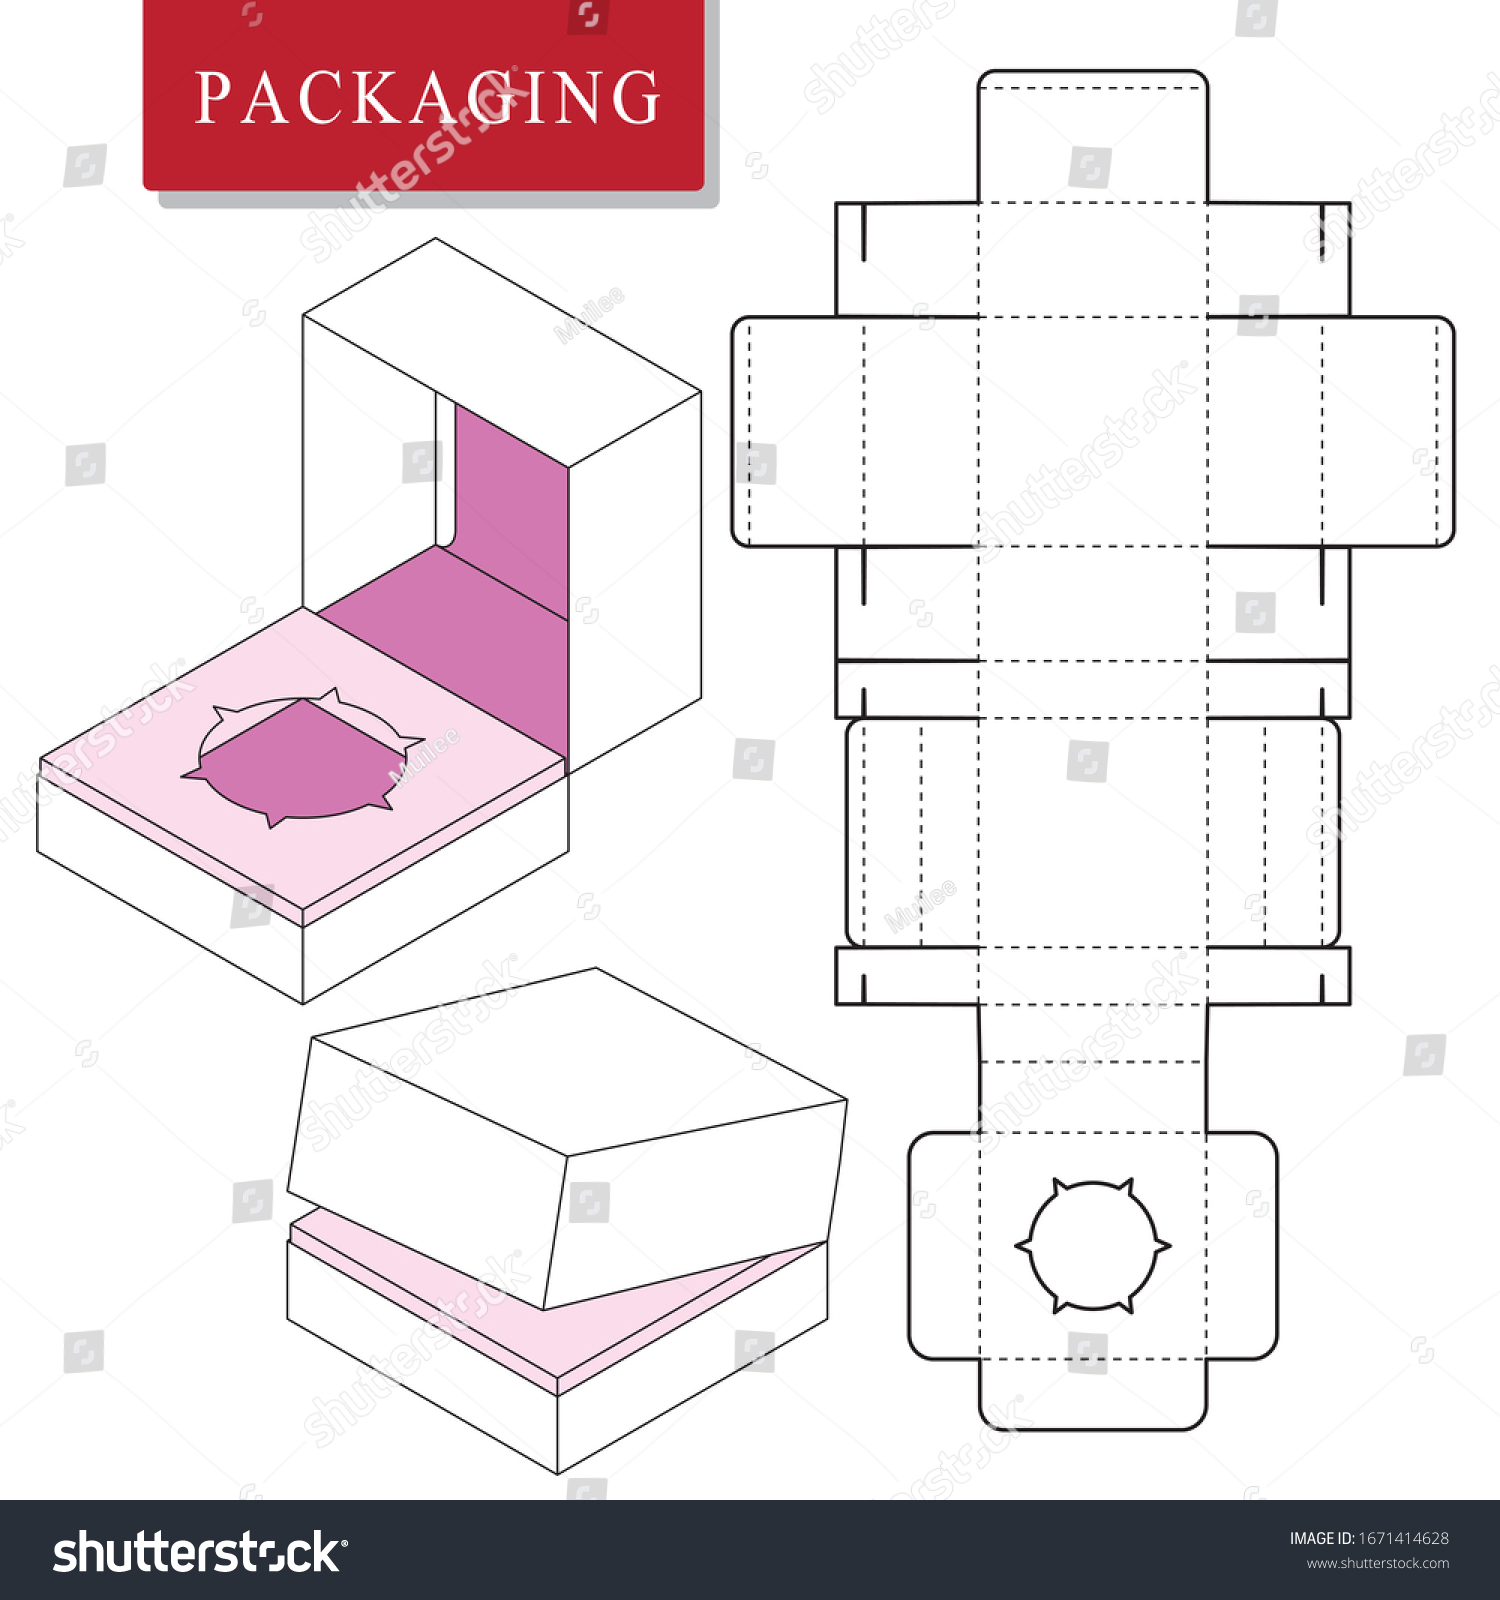 Box Template Design Product Stock Vector (Royalty Free) 1671414628 ...